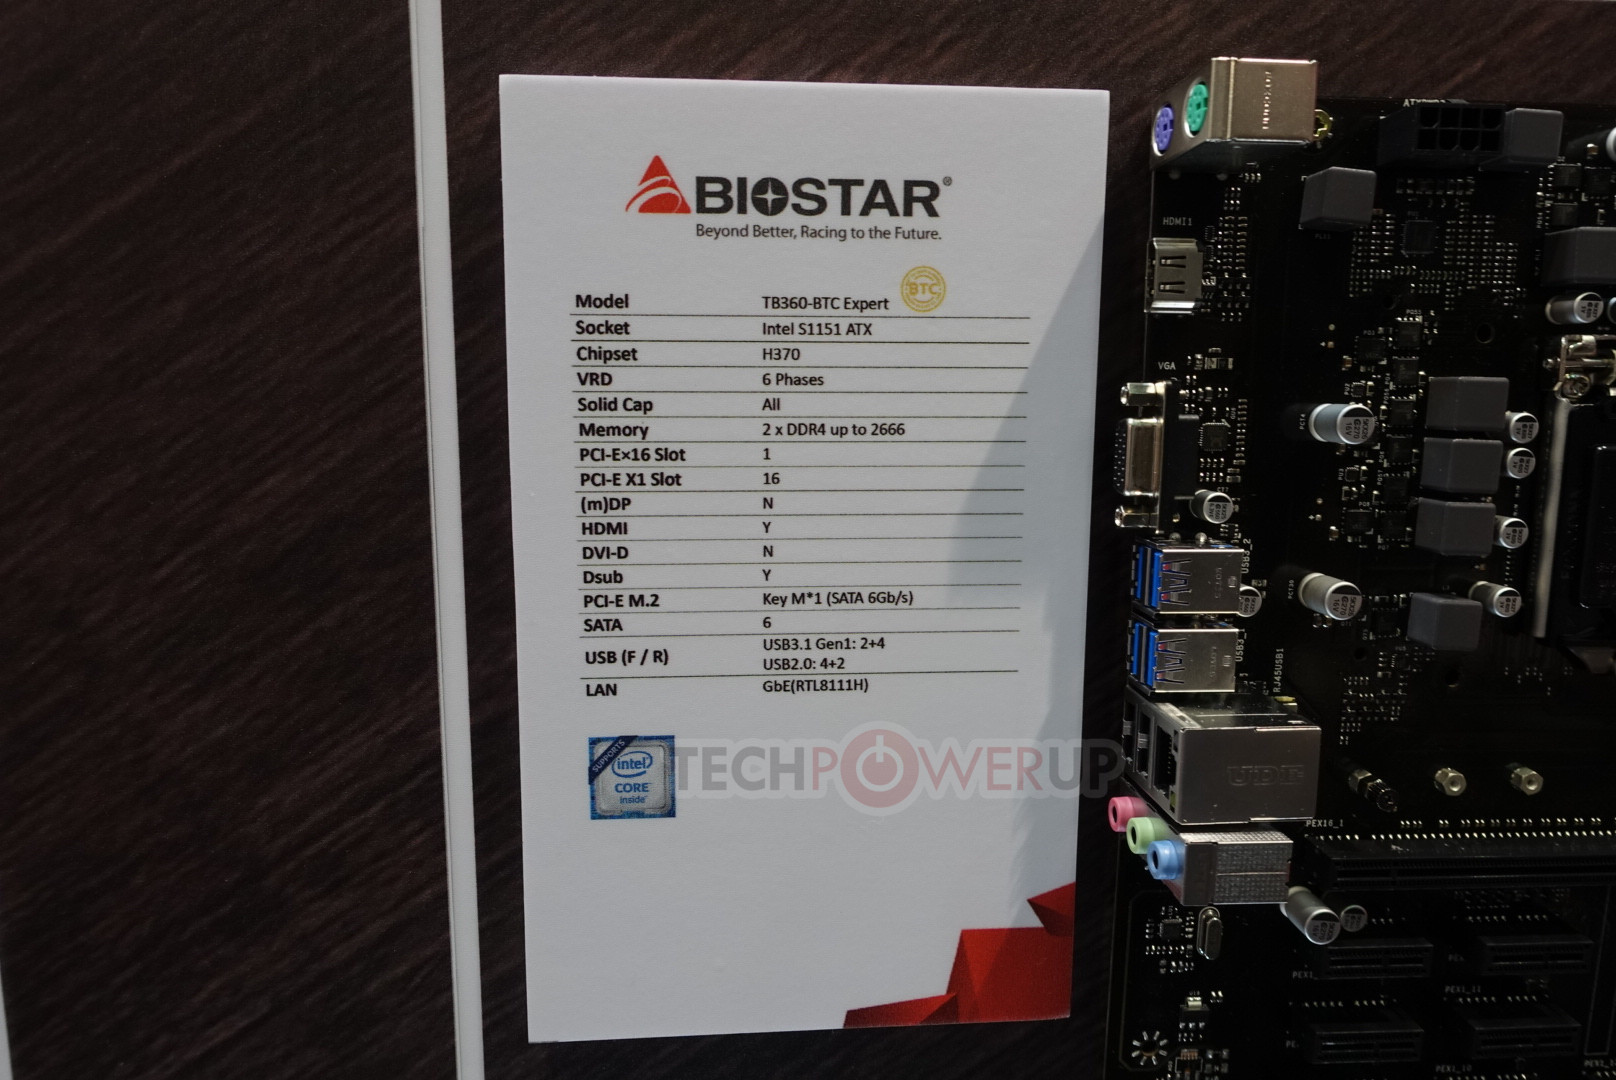 BIOSTAR at COMPUTEX 2018 - Motherboards With a Focus on Mining